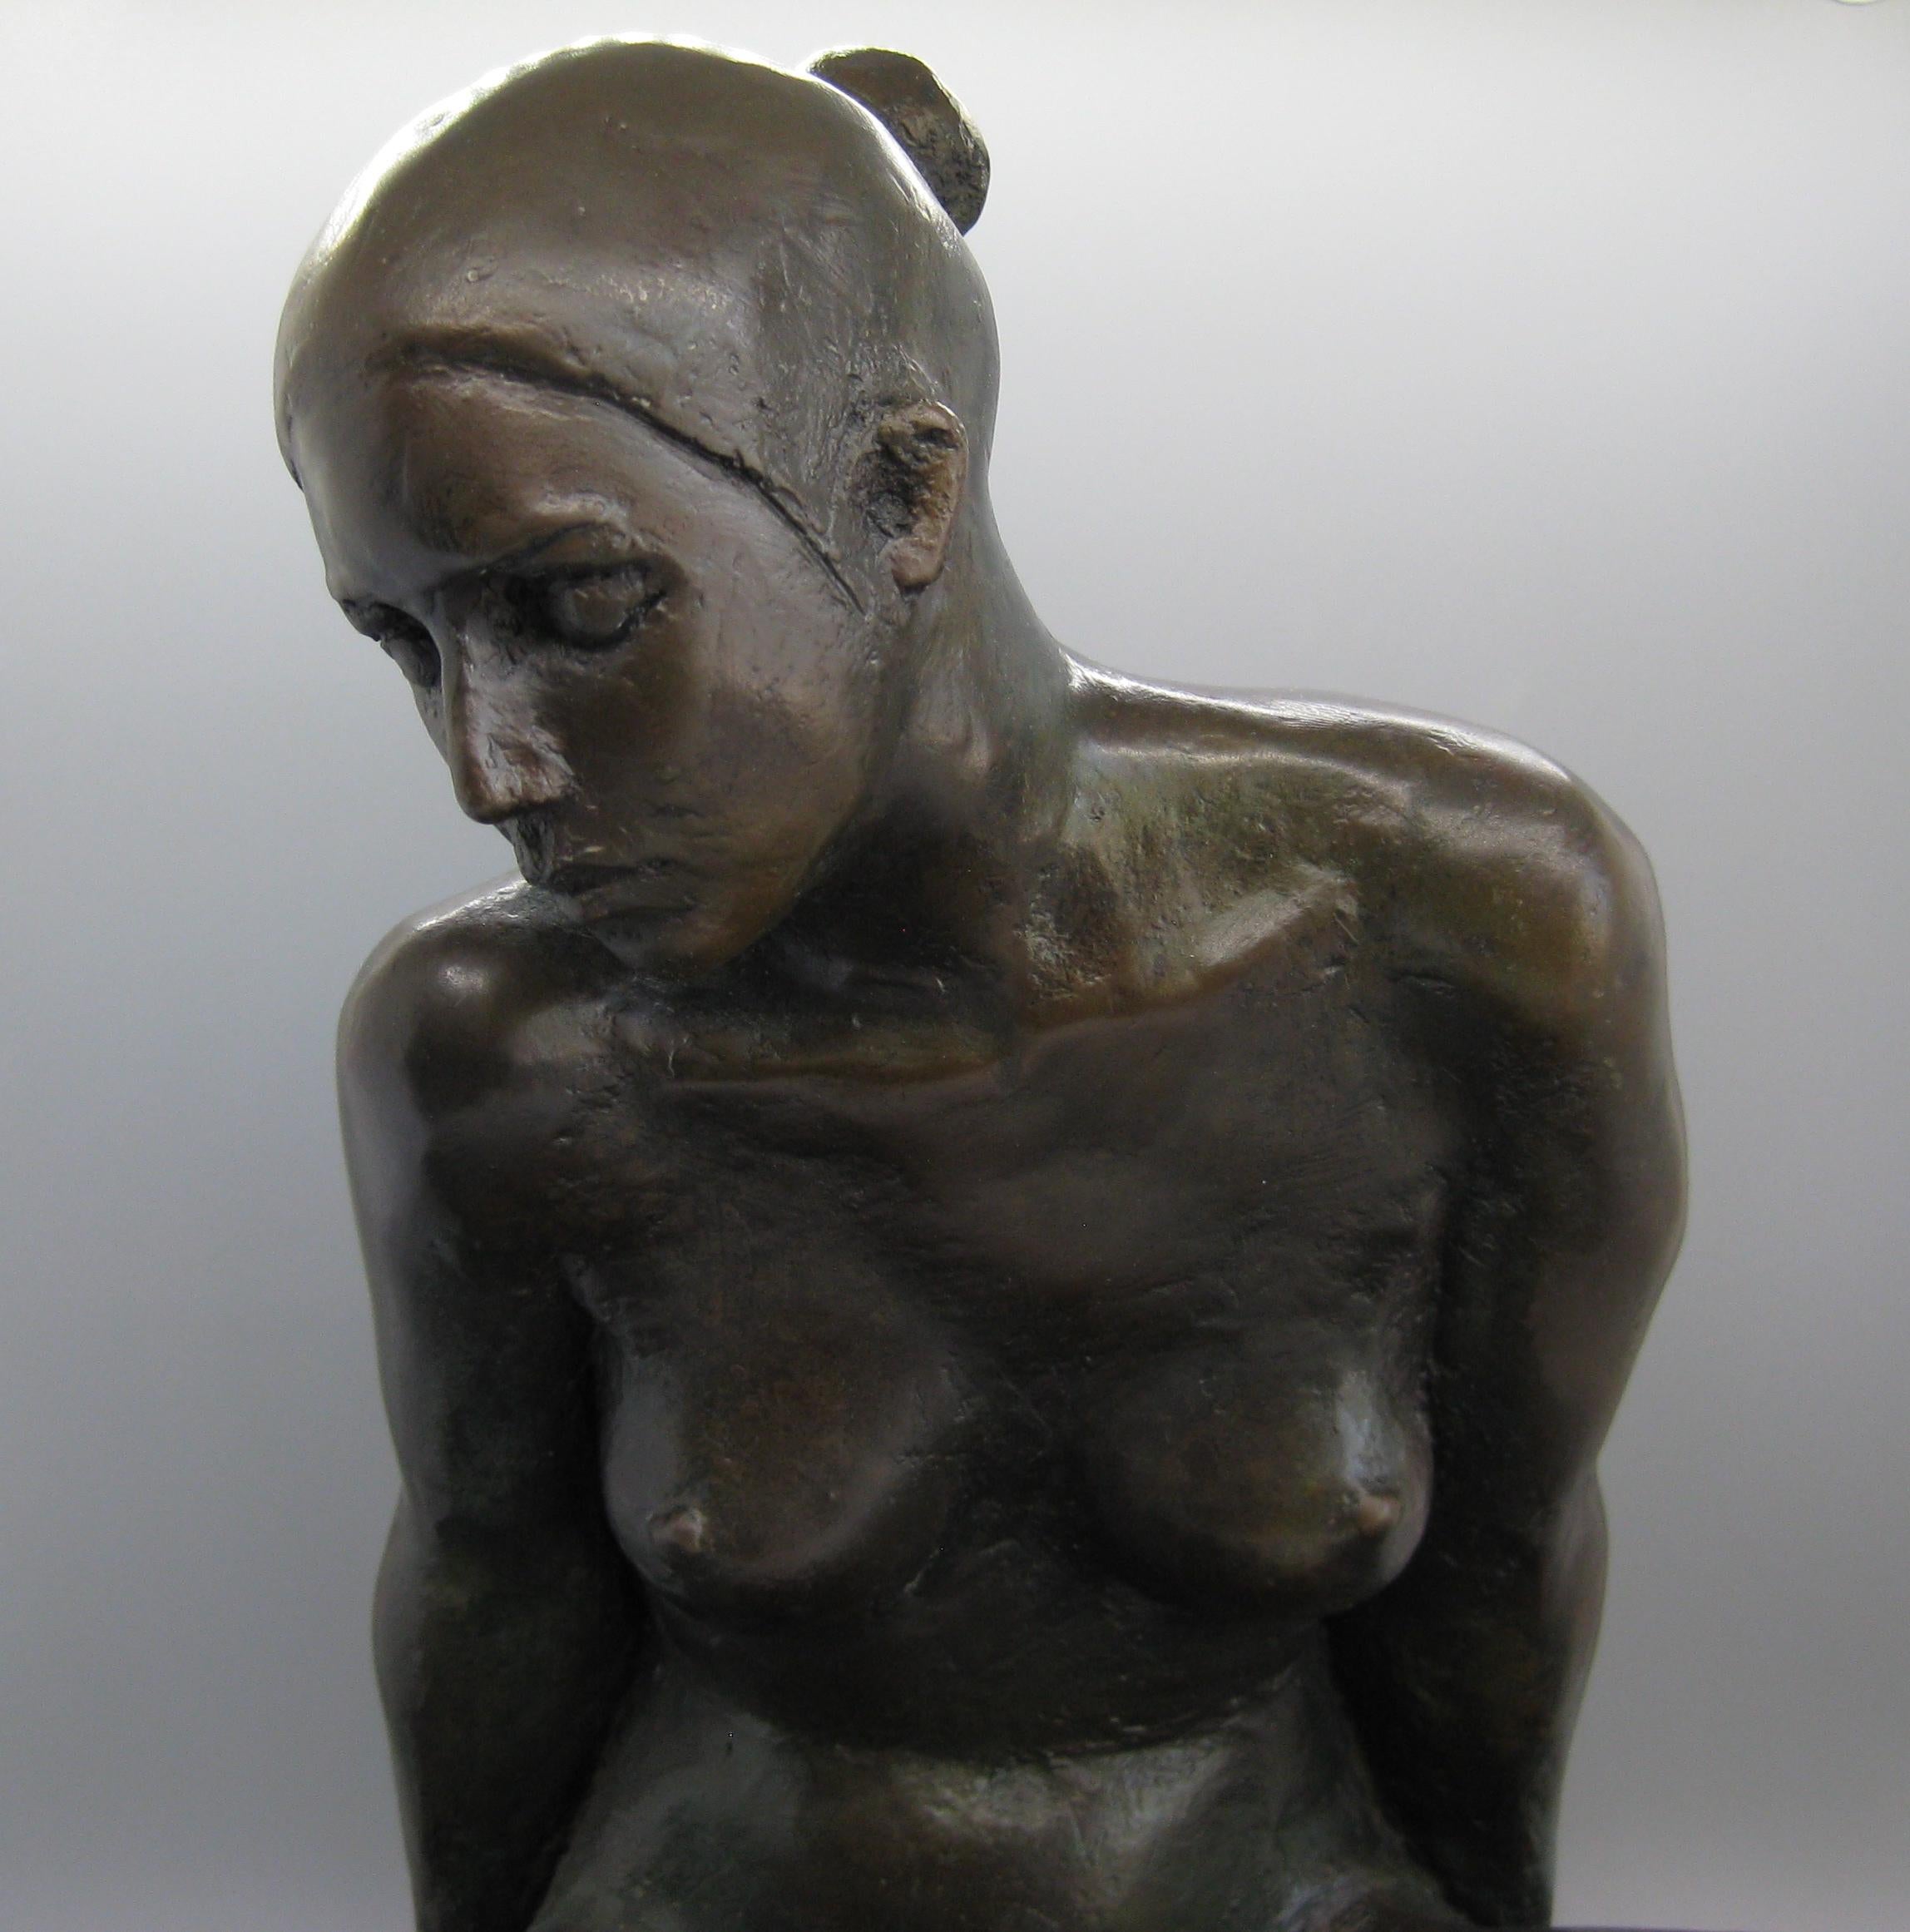 Impressive solid cast bronze sculpture by famous San Diego artist Mary Buckman. The sculpture is titled 